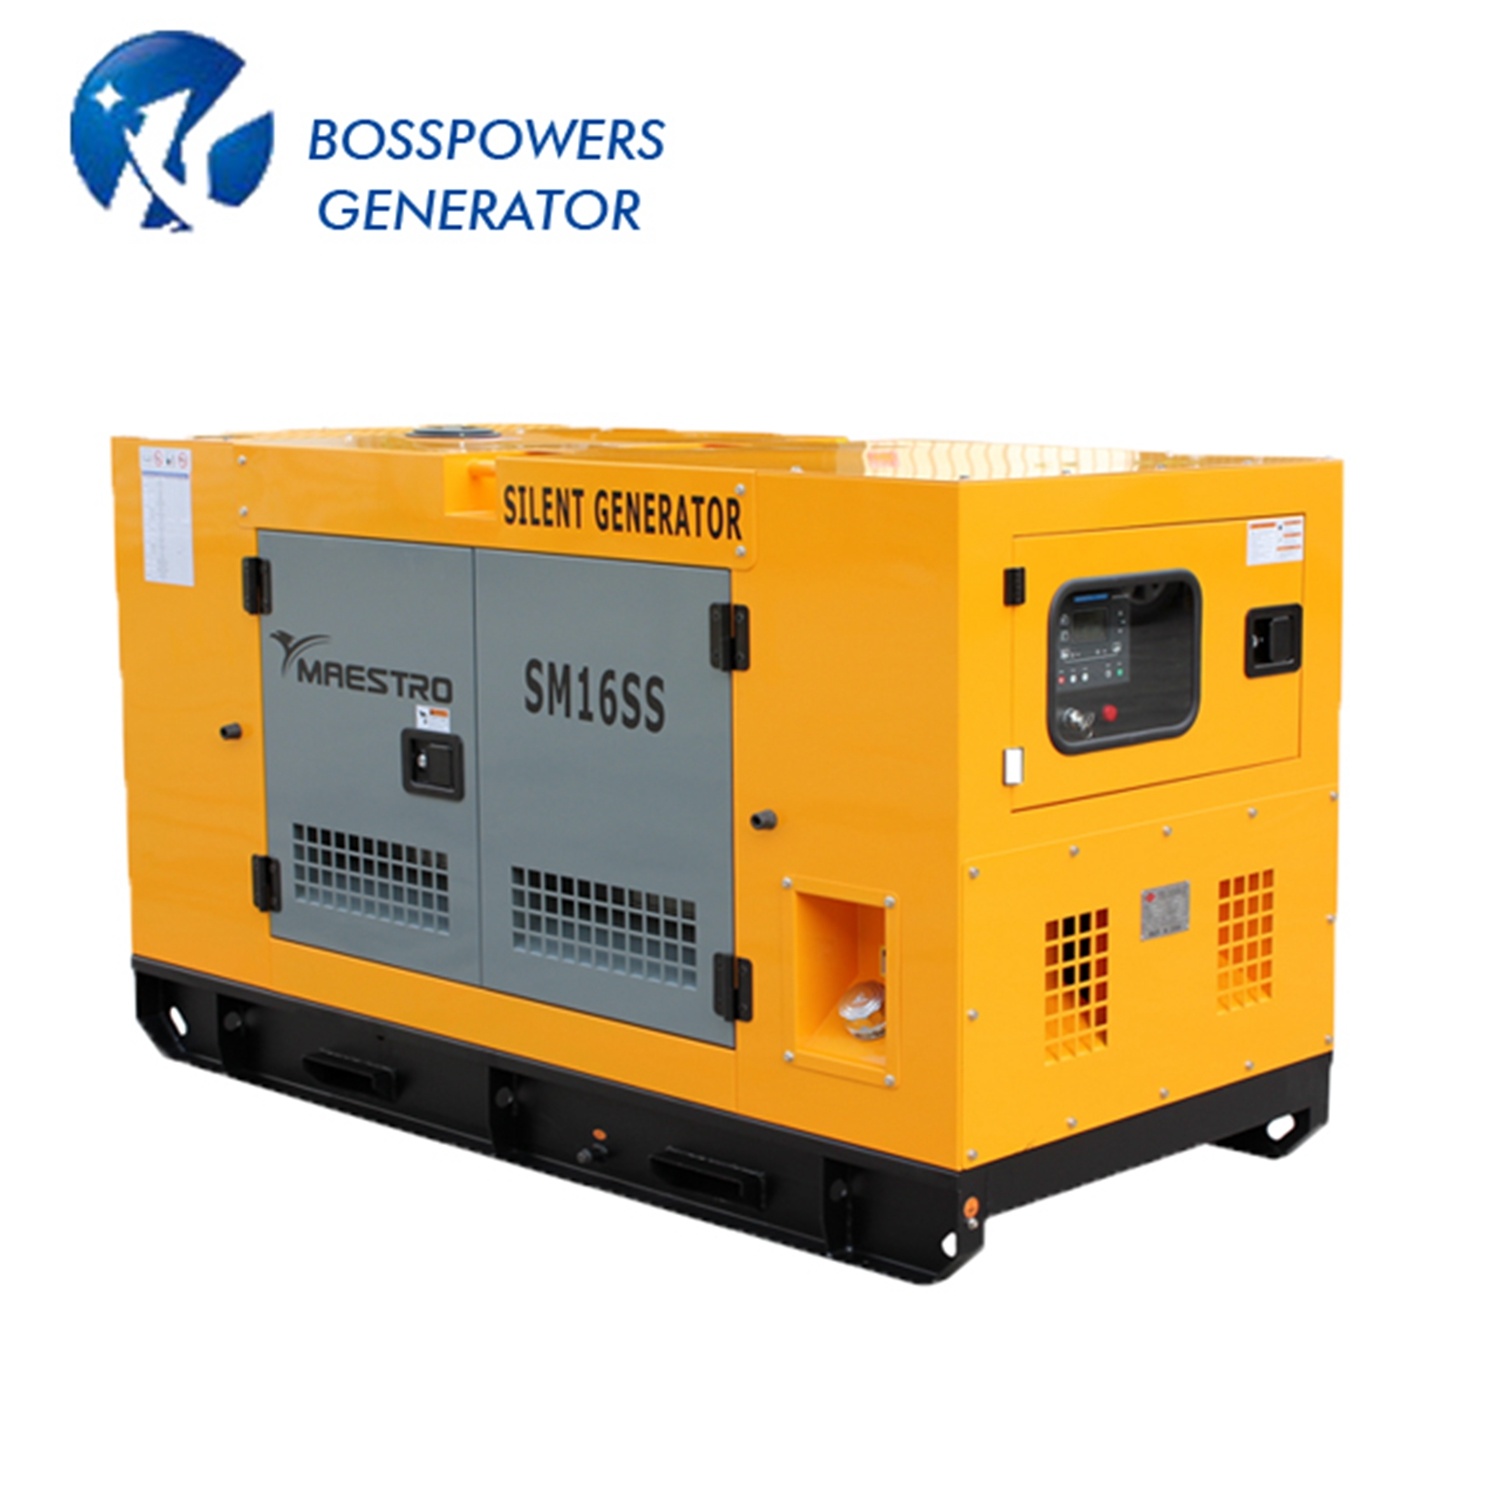 Rated Power 44kVA 60Hz Deutz Single Phase Industrial Diesel Generator with Soundproof Canopy